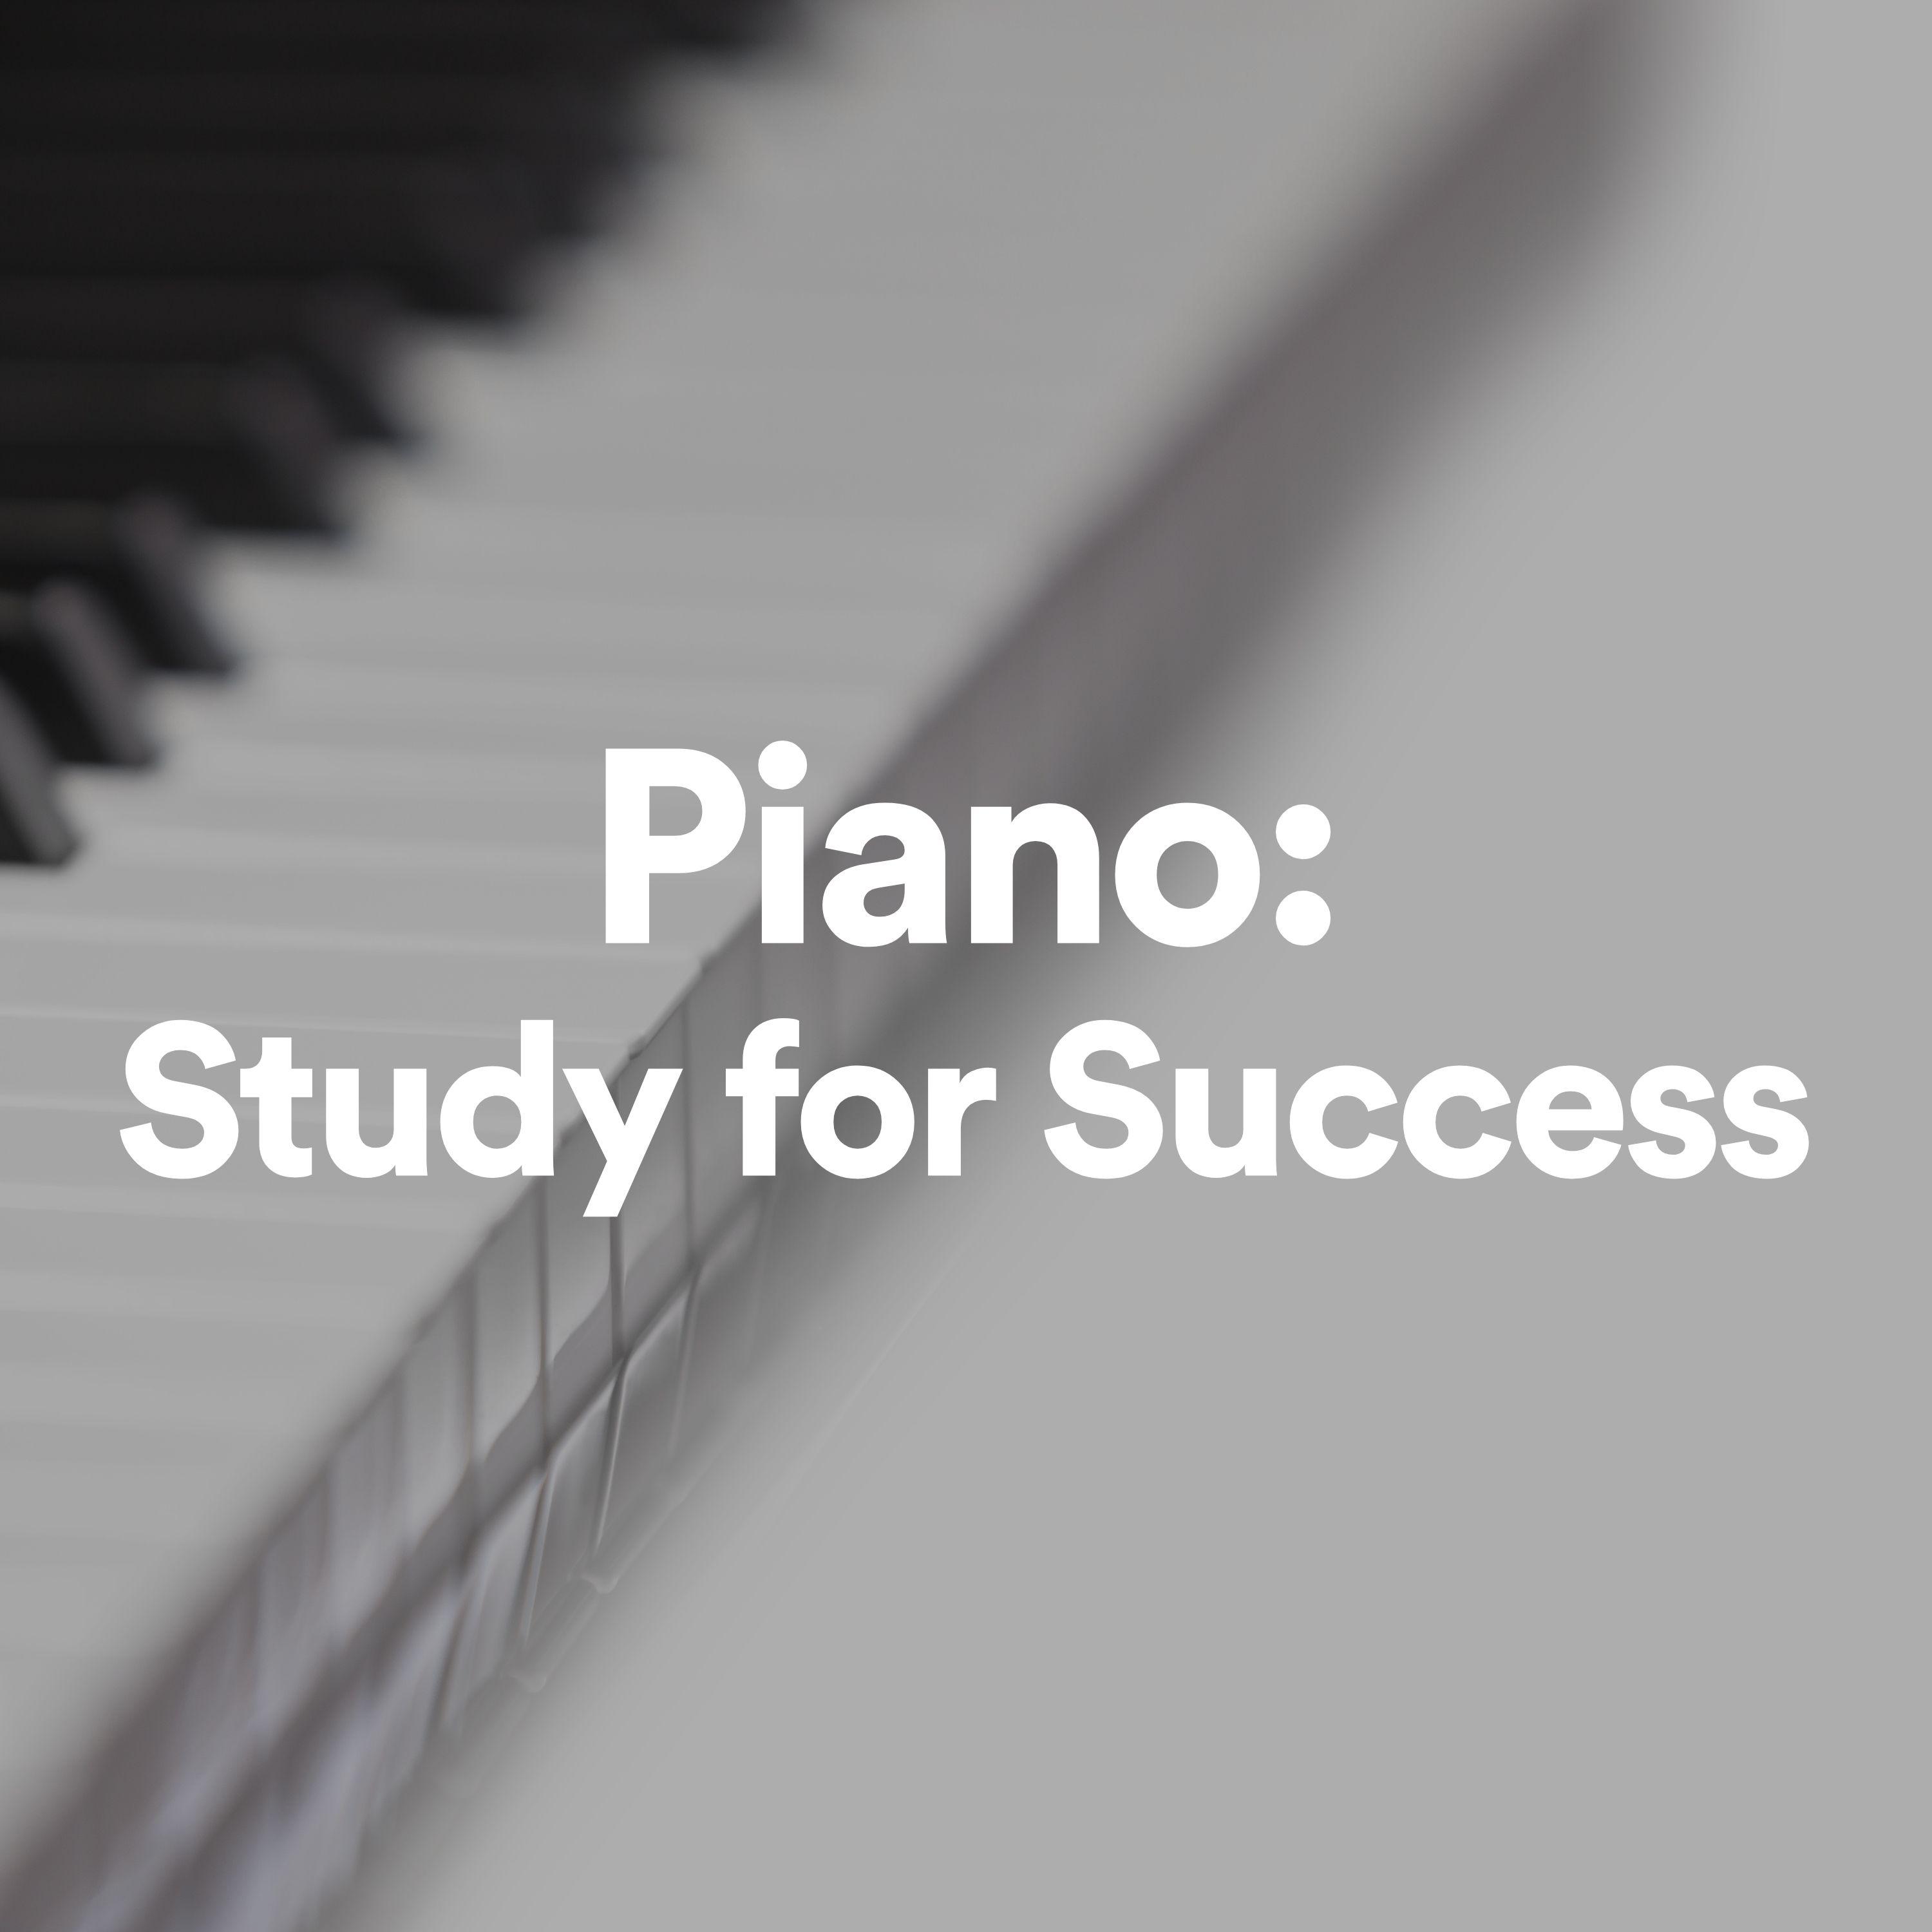 Piano for Studying - Literation